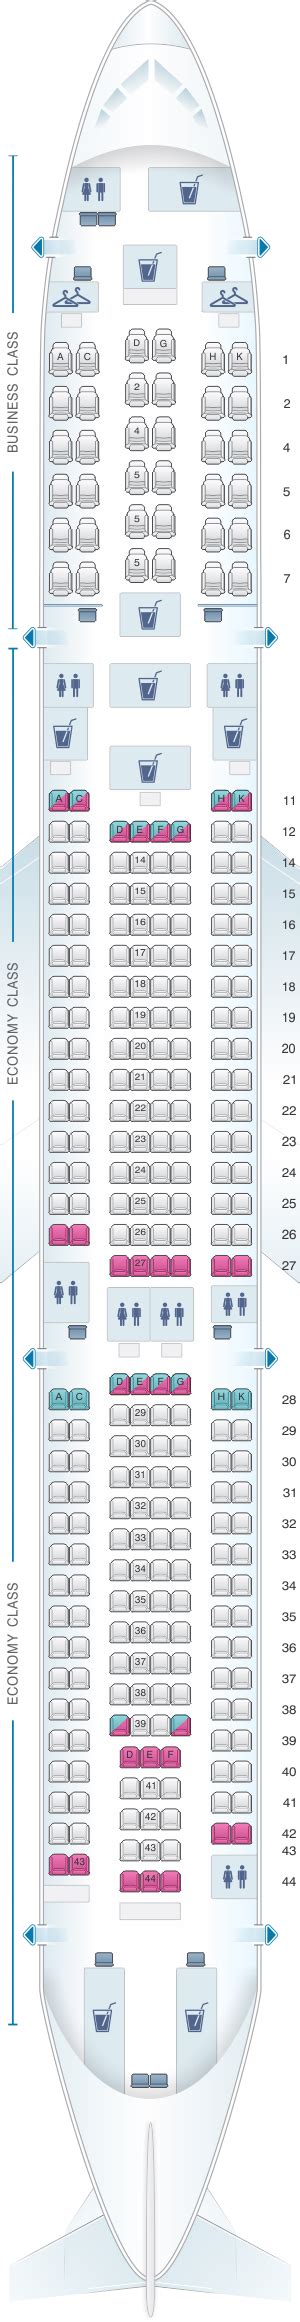 malaysia airlines airbus a330 seat map